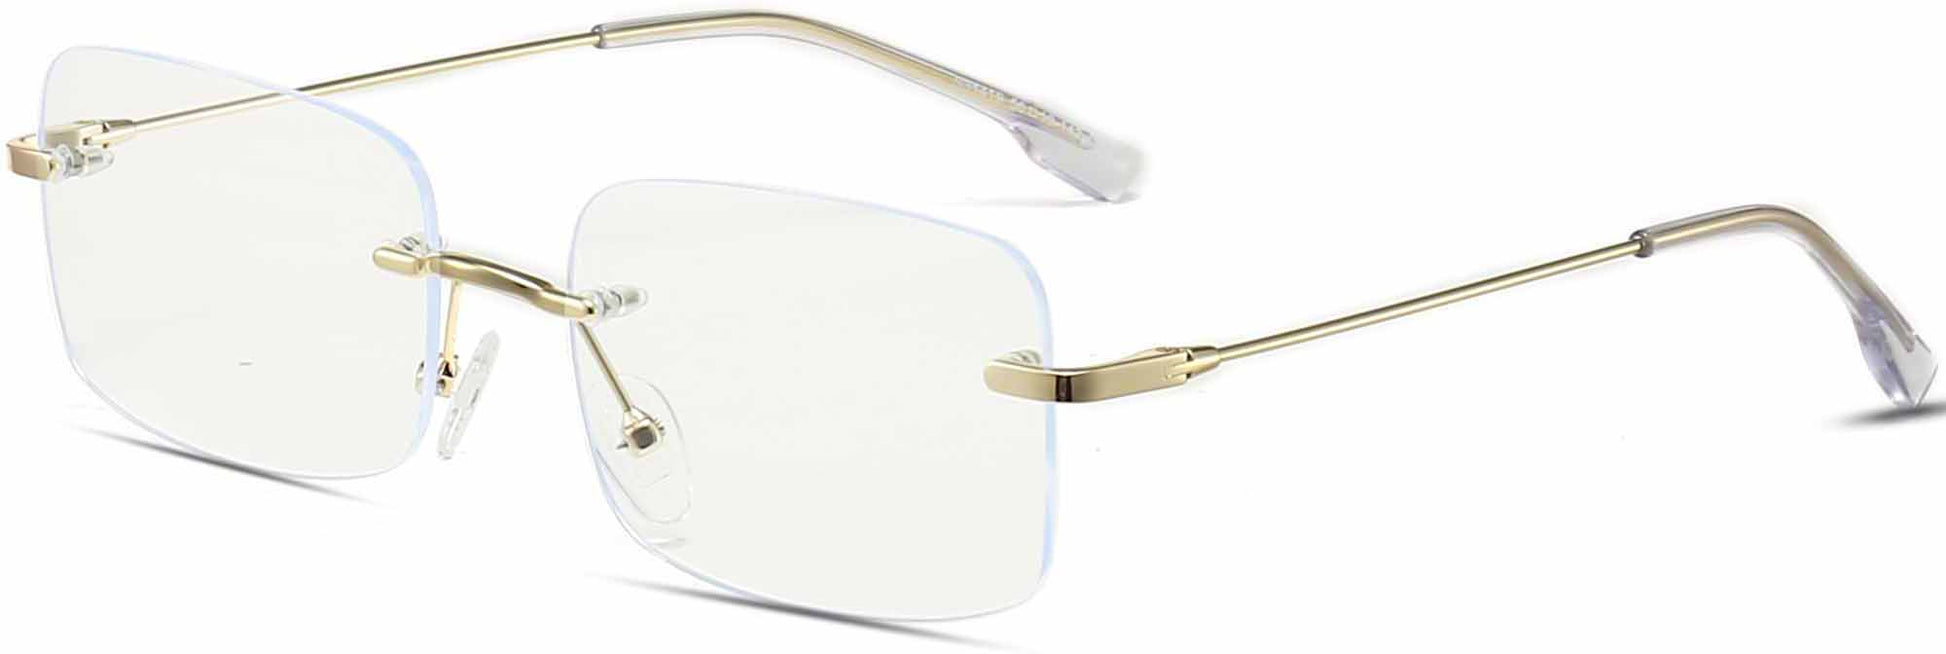 Lukas Square Gold Eyeglasses from ANRRI, angle view